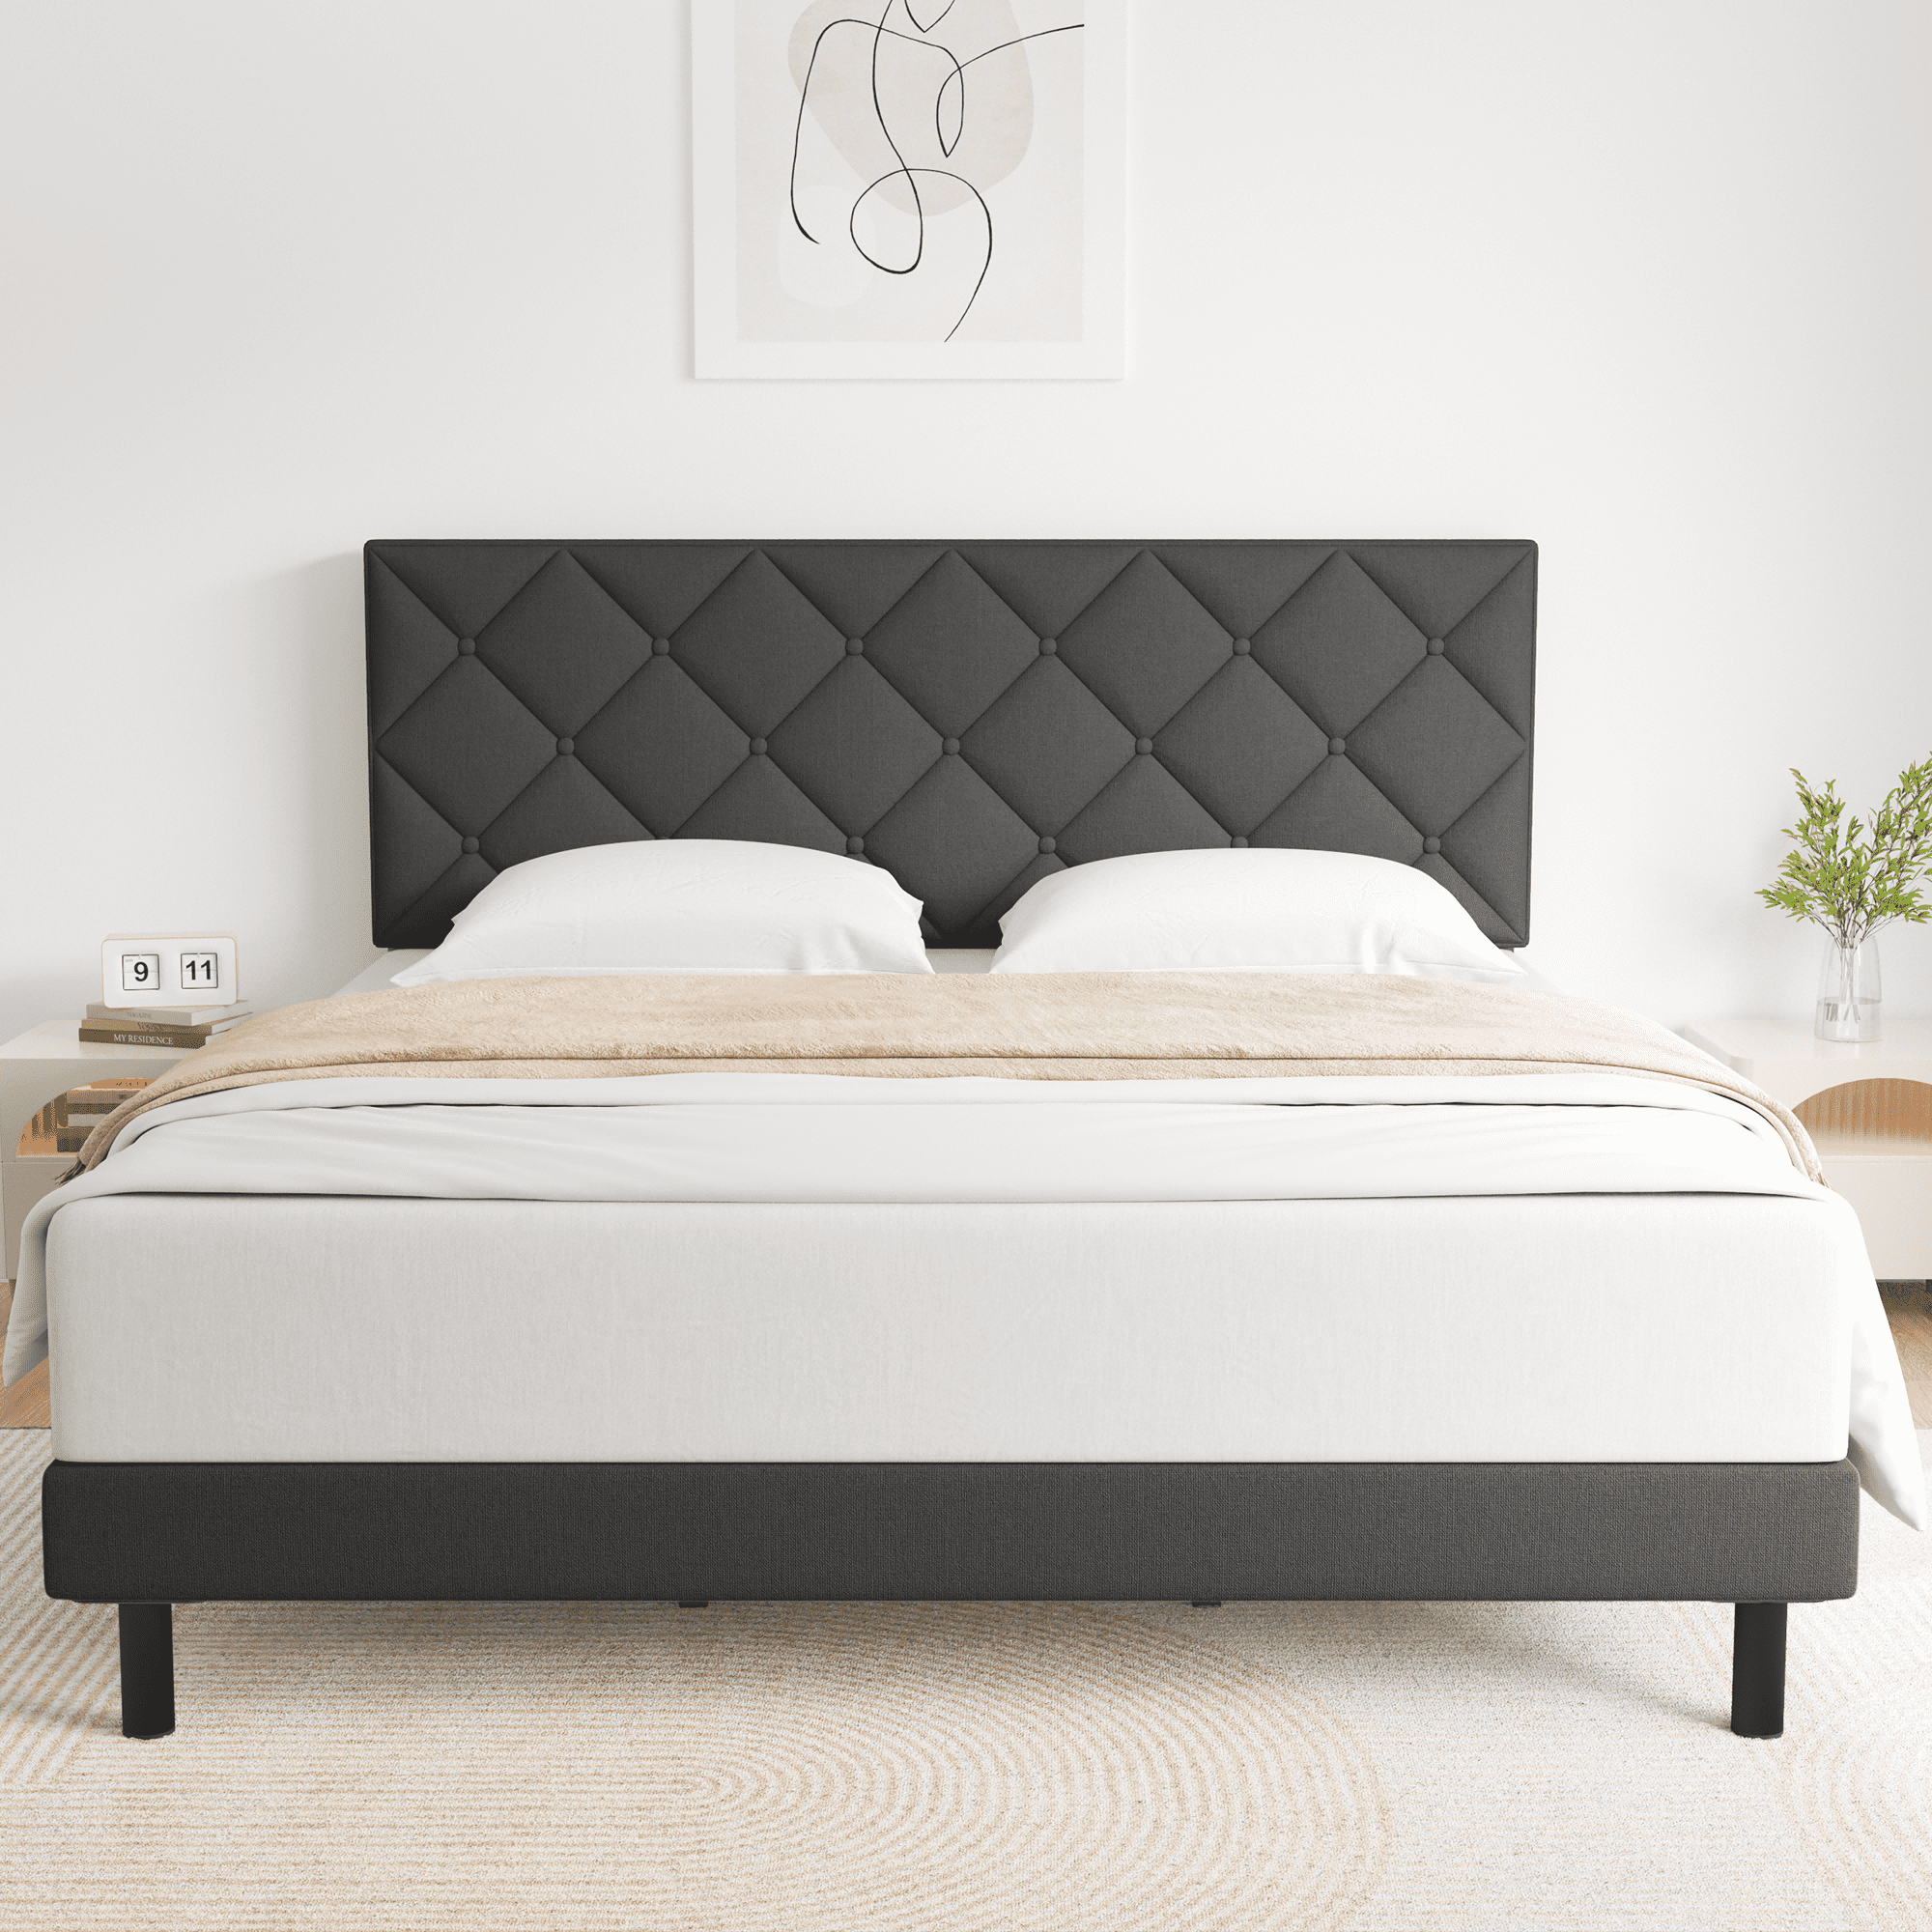 Queen Bed, HAIIDE Queen Size bed Frame with Fabric Upholstered Headboard,Dark Grey, Easy Assembly - image 1 of 7